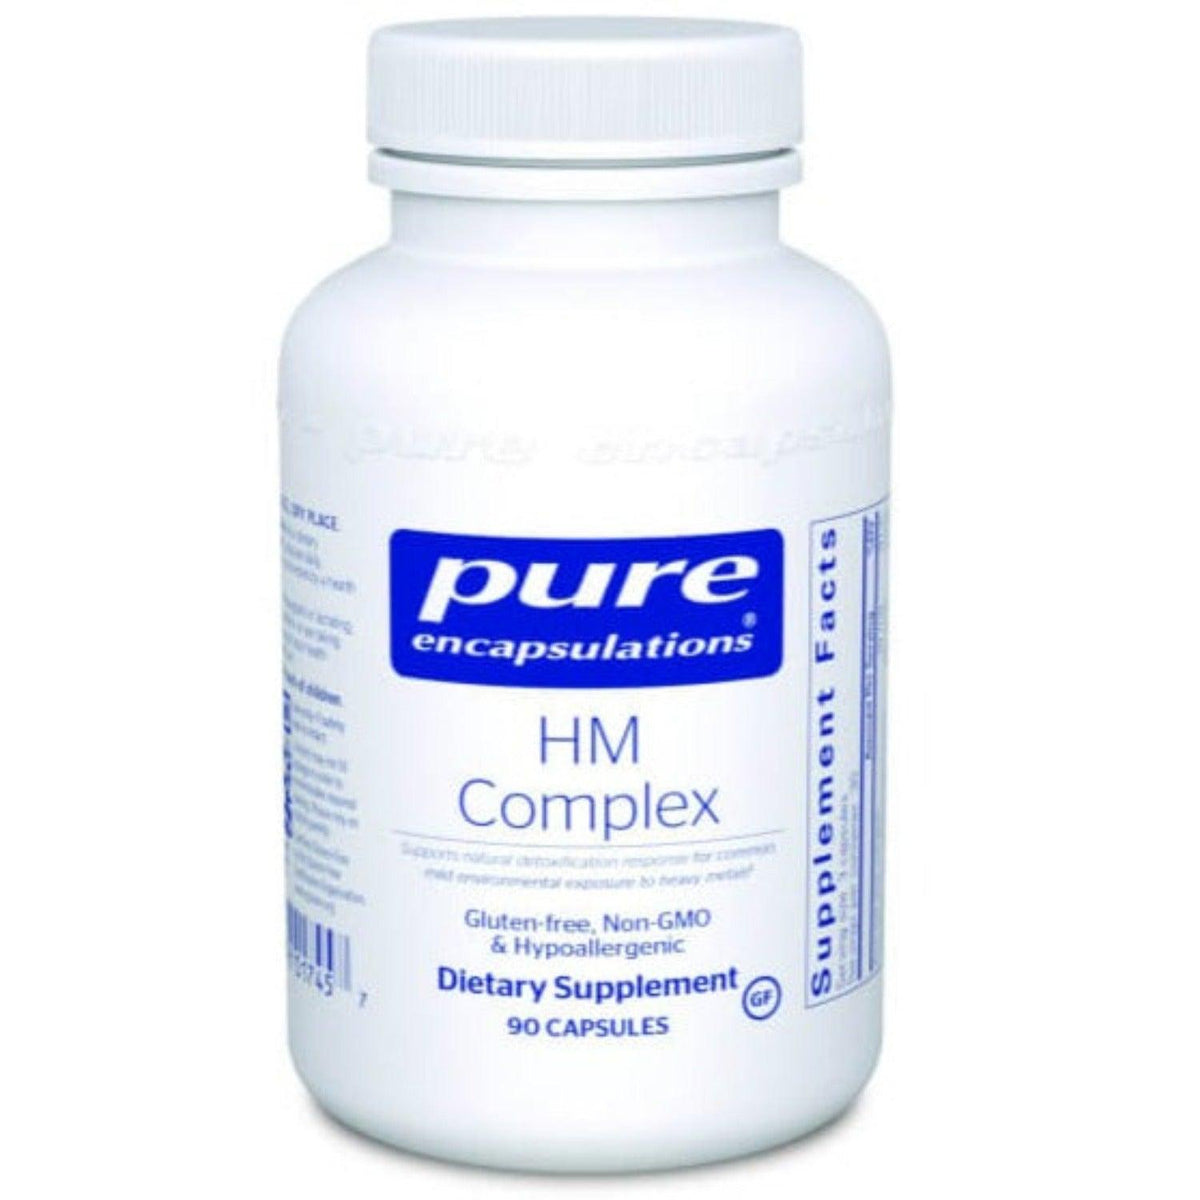 Pure Encapsulations HM Complex (Formerly HM Chelate) 90 Caps Supplements at Village Vitamin Store